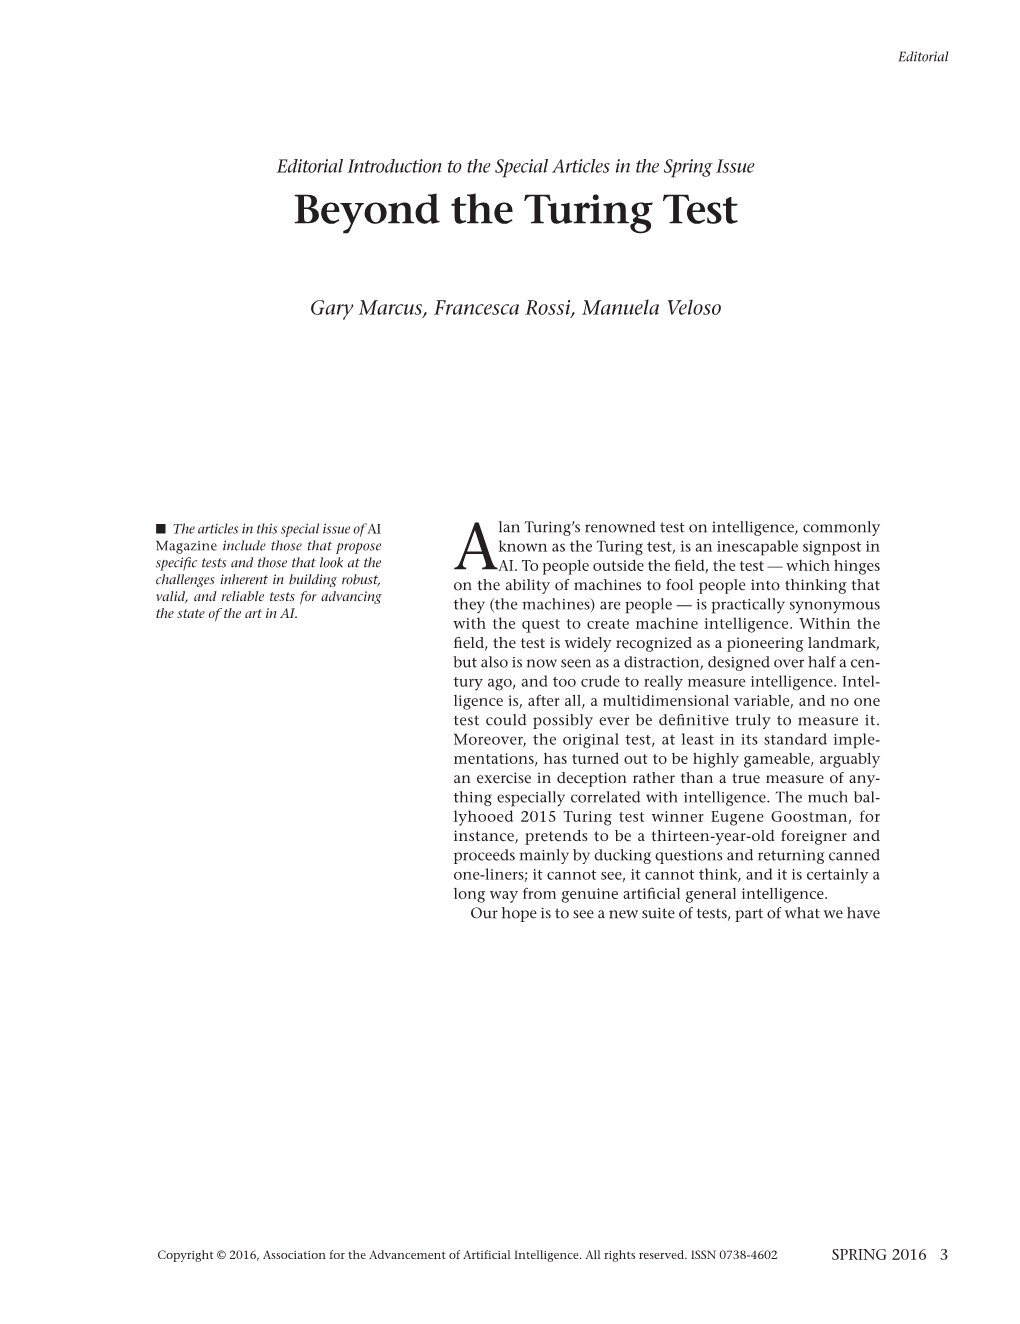 Beyond the Turing Test